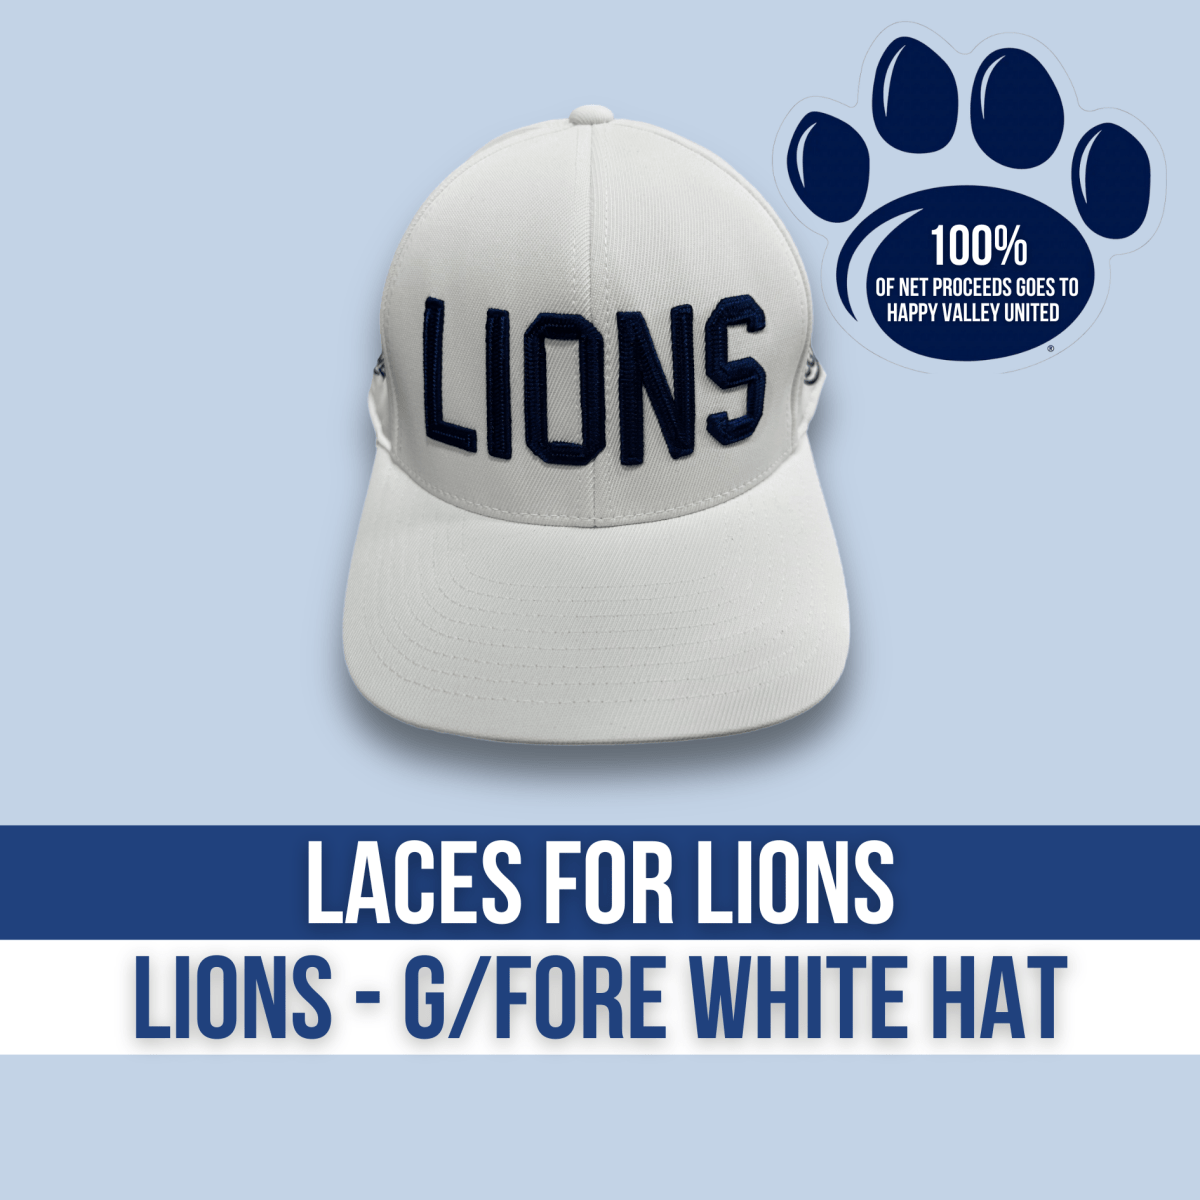 Laces for Lions White "LIONS" Happy Valley United G/FORE 110 Hat - sneaker - Hats - G/Fore - Jawns on Fire